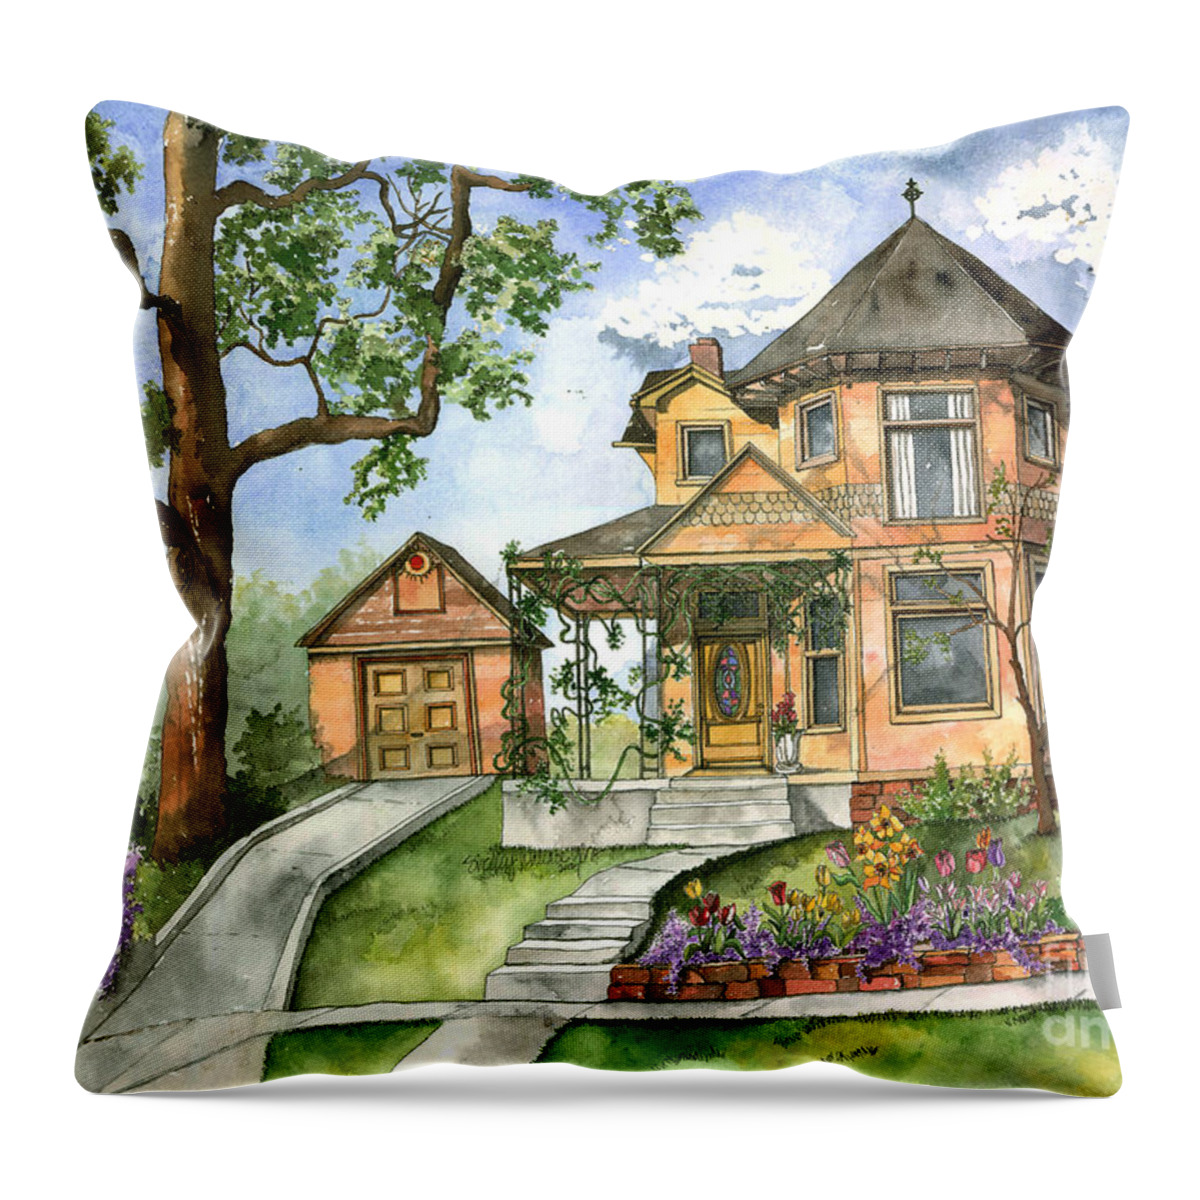 Vintage House Throw Pillow featuring the painting Hilltop Home by Shelley Wallace Ylst